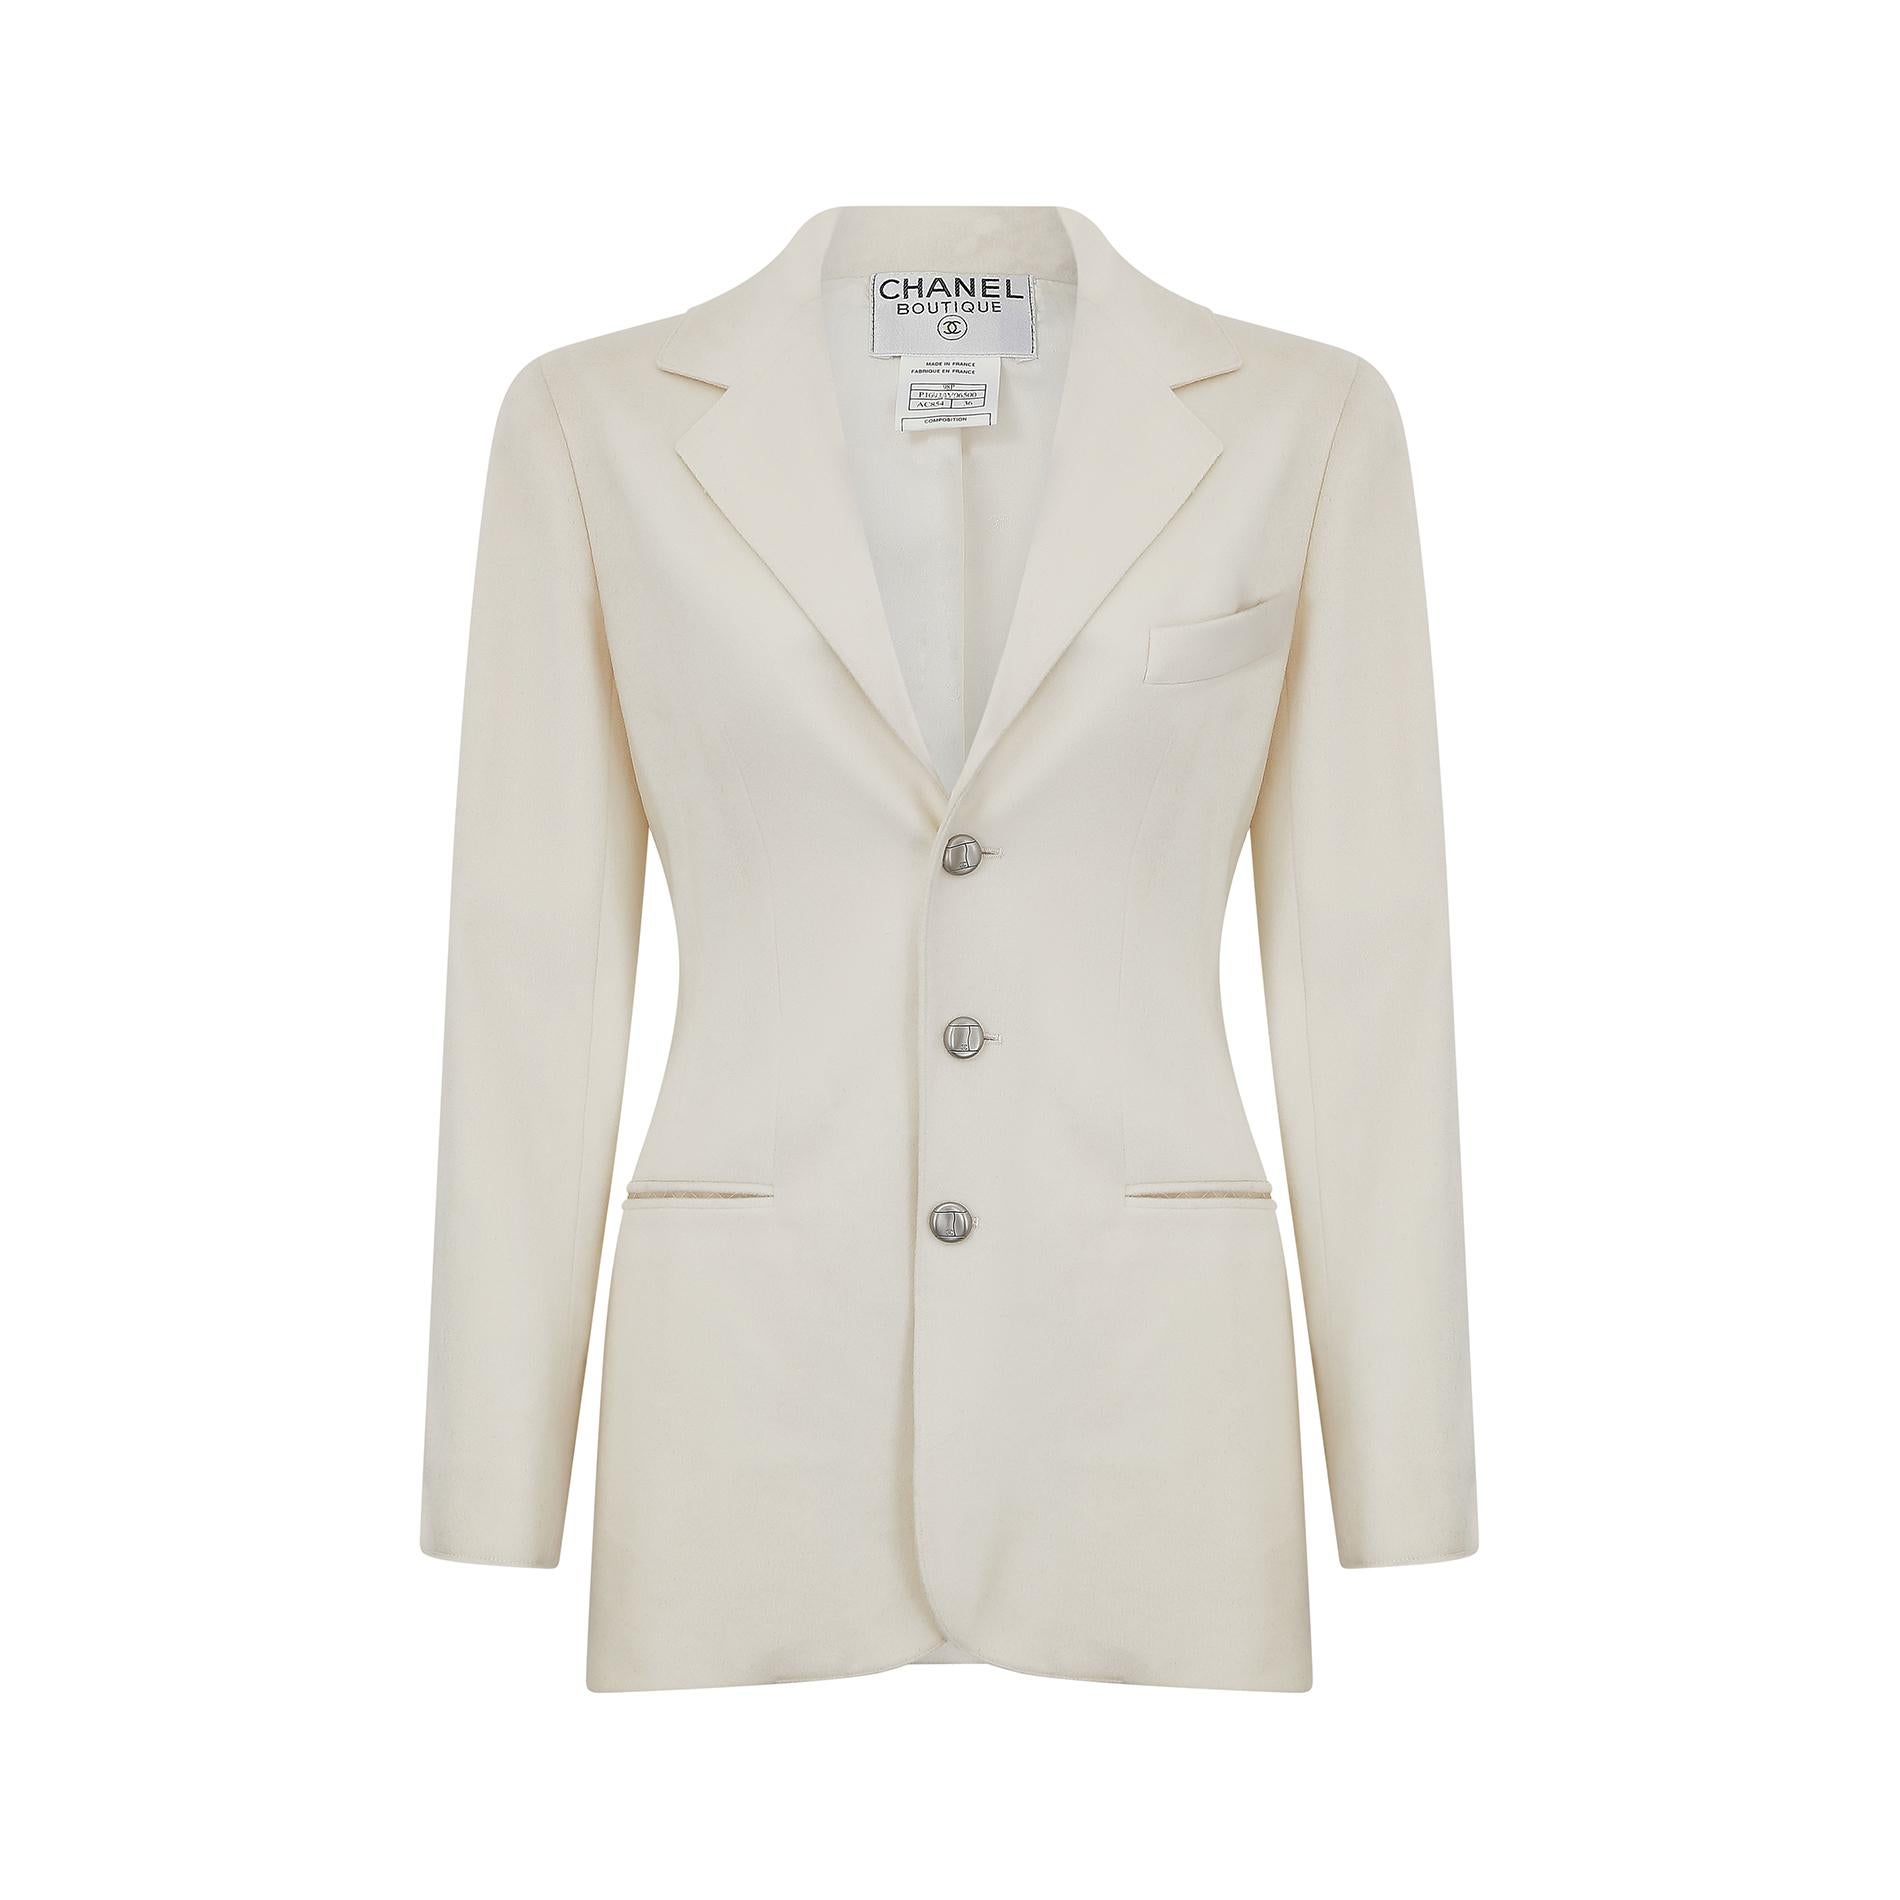 This 1990s Chanel blazer jacket is made in France and cut from a beautifully soft cream wool fabric.  It features a sharp collar and lapel detail, and fastens at the front with three molded silver buttons, all adorned with the classic Chanel double